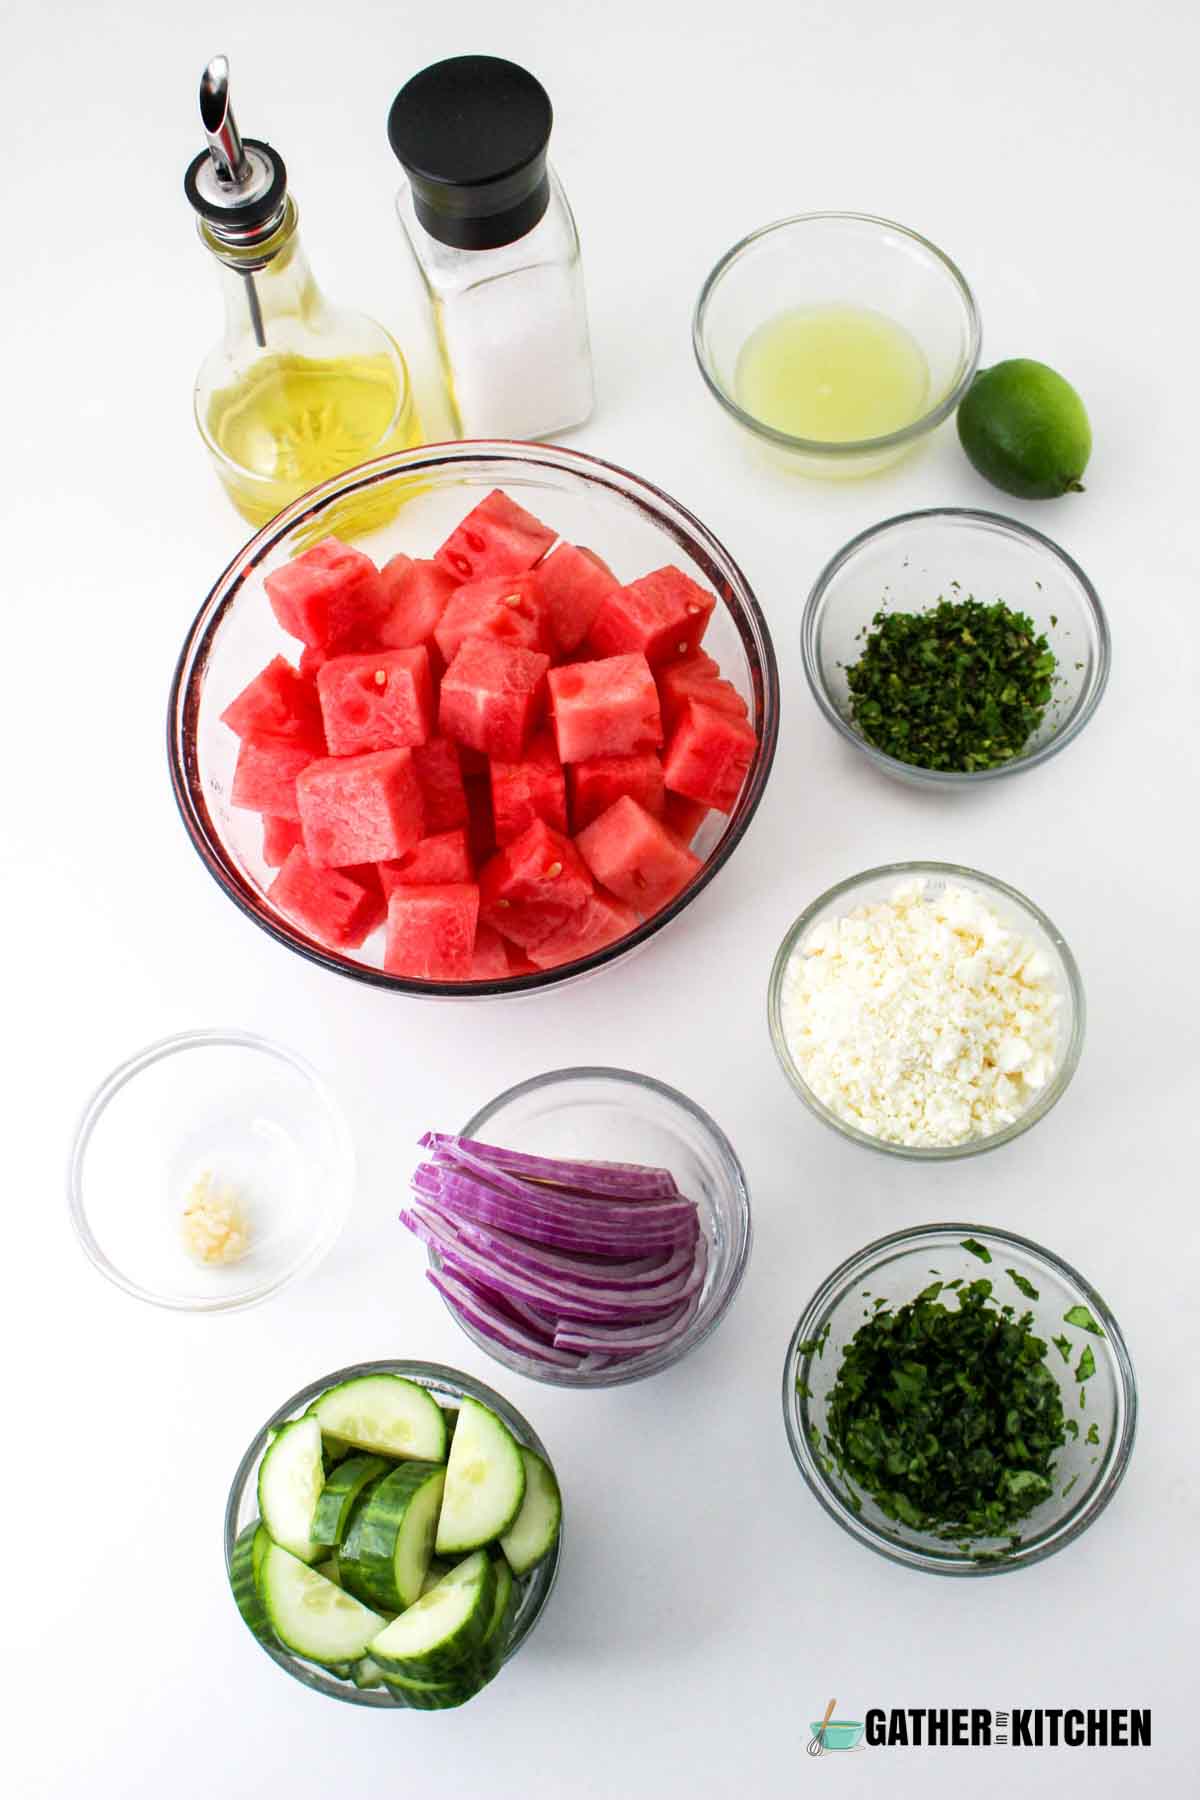 Ingredients for watermelon salad.